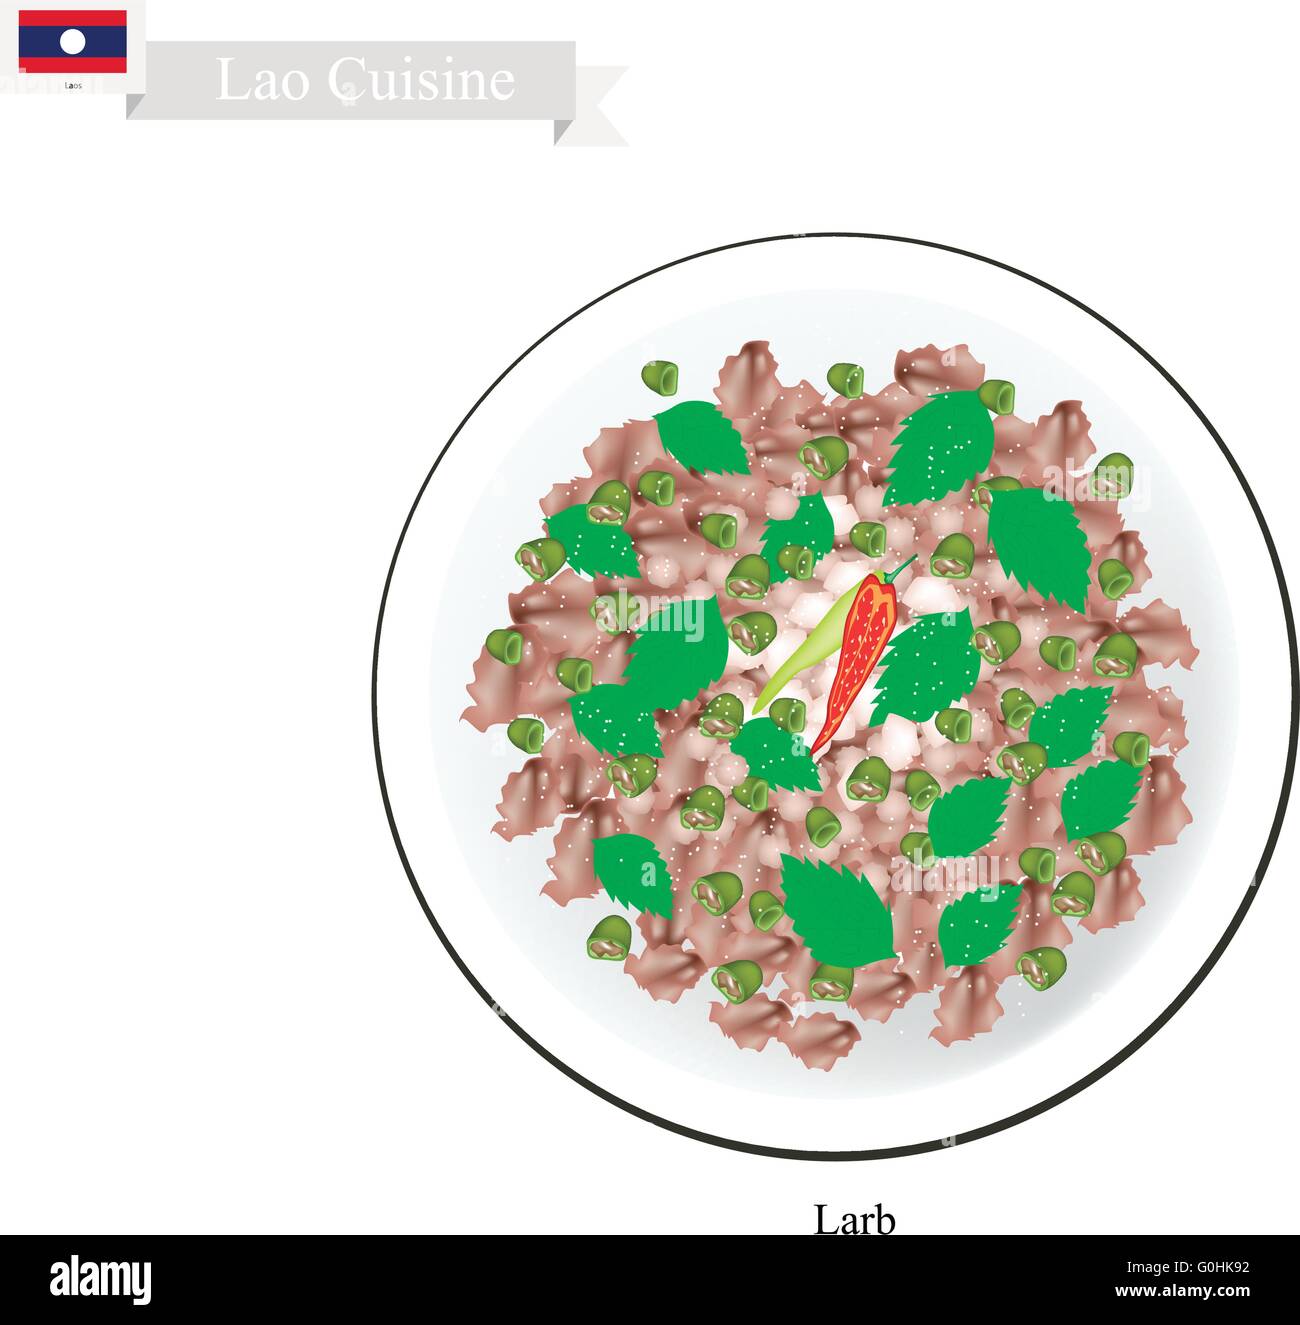 Laos Cuisine, Larb or Traditional Spicy Minced Meat Salad. One of The Most Popular Dish in Laos. Stock Vector